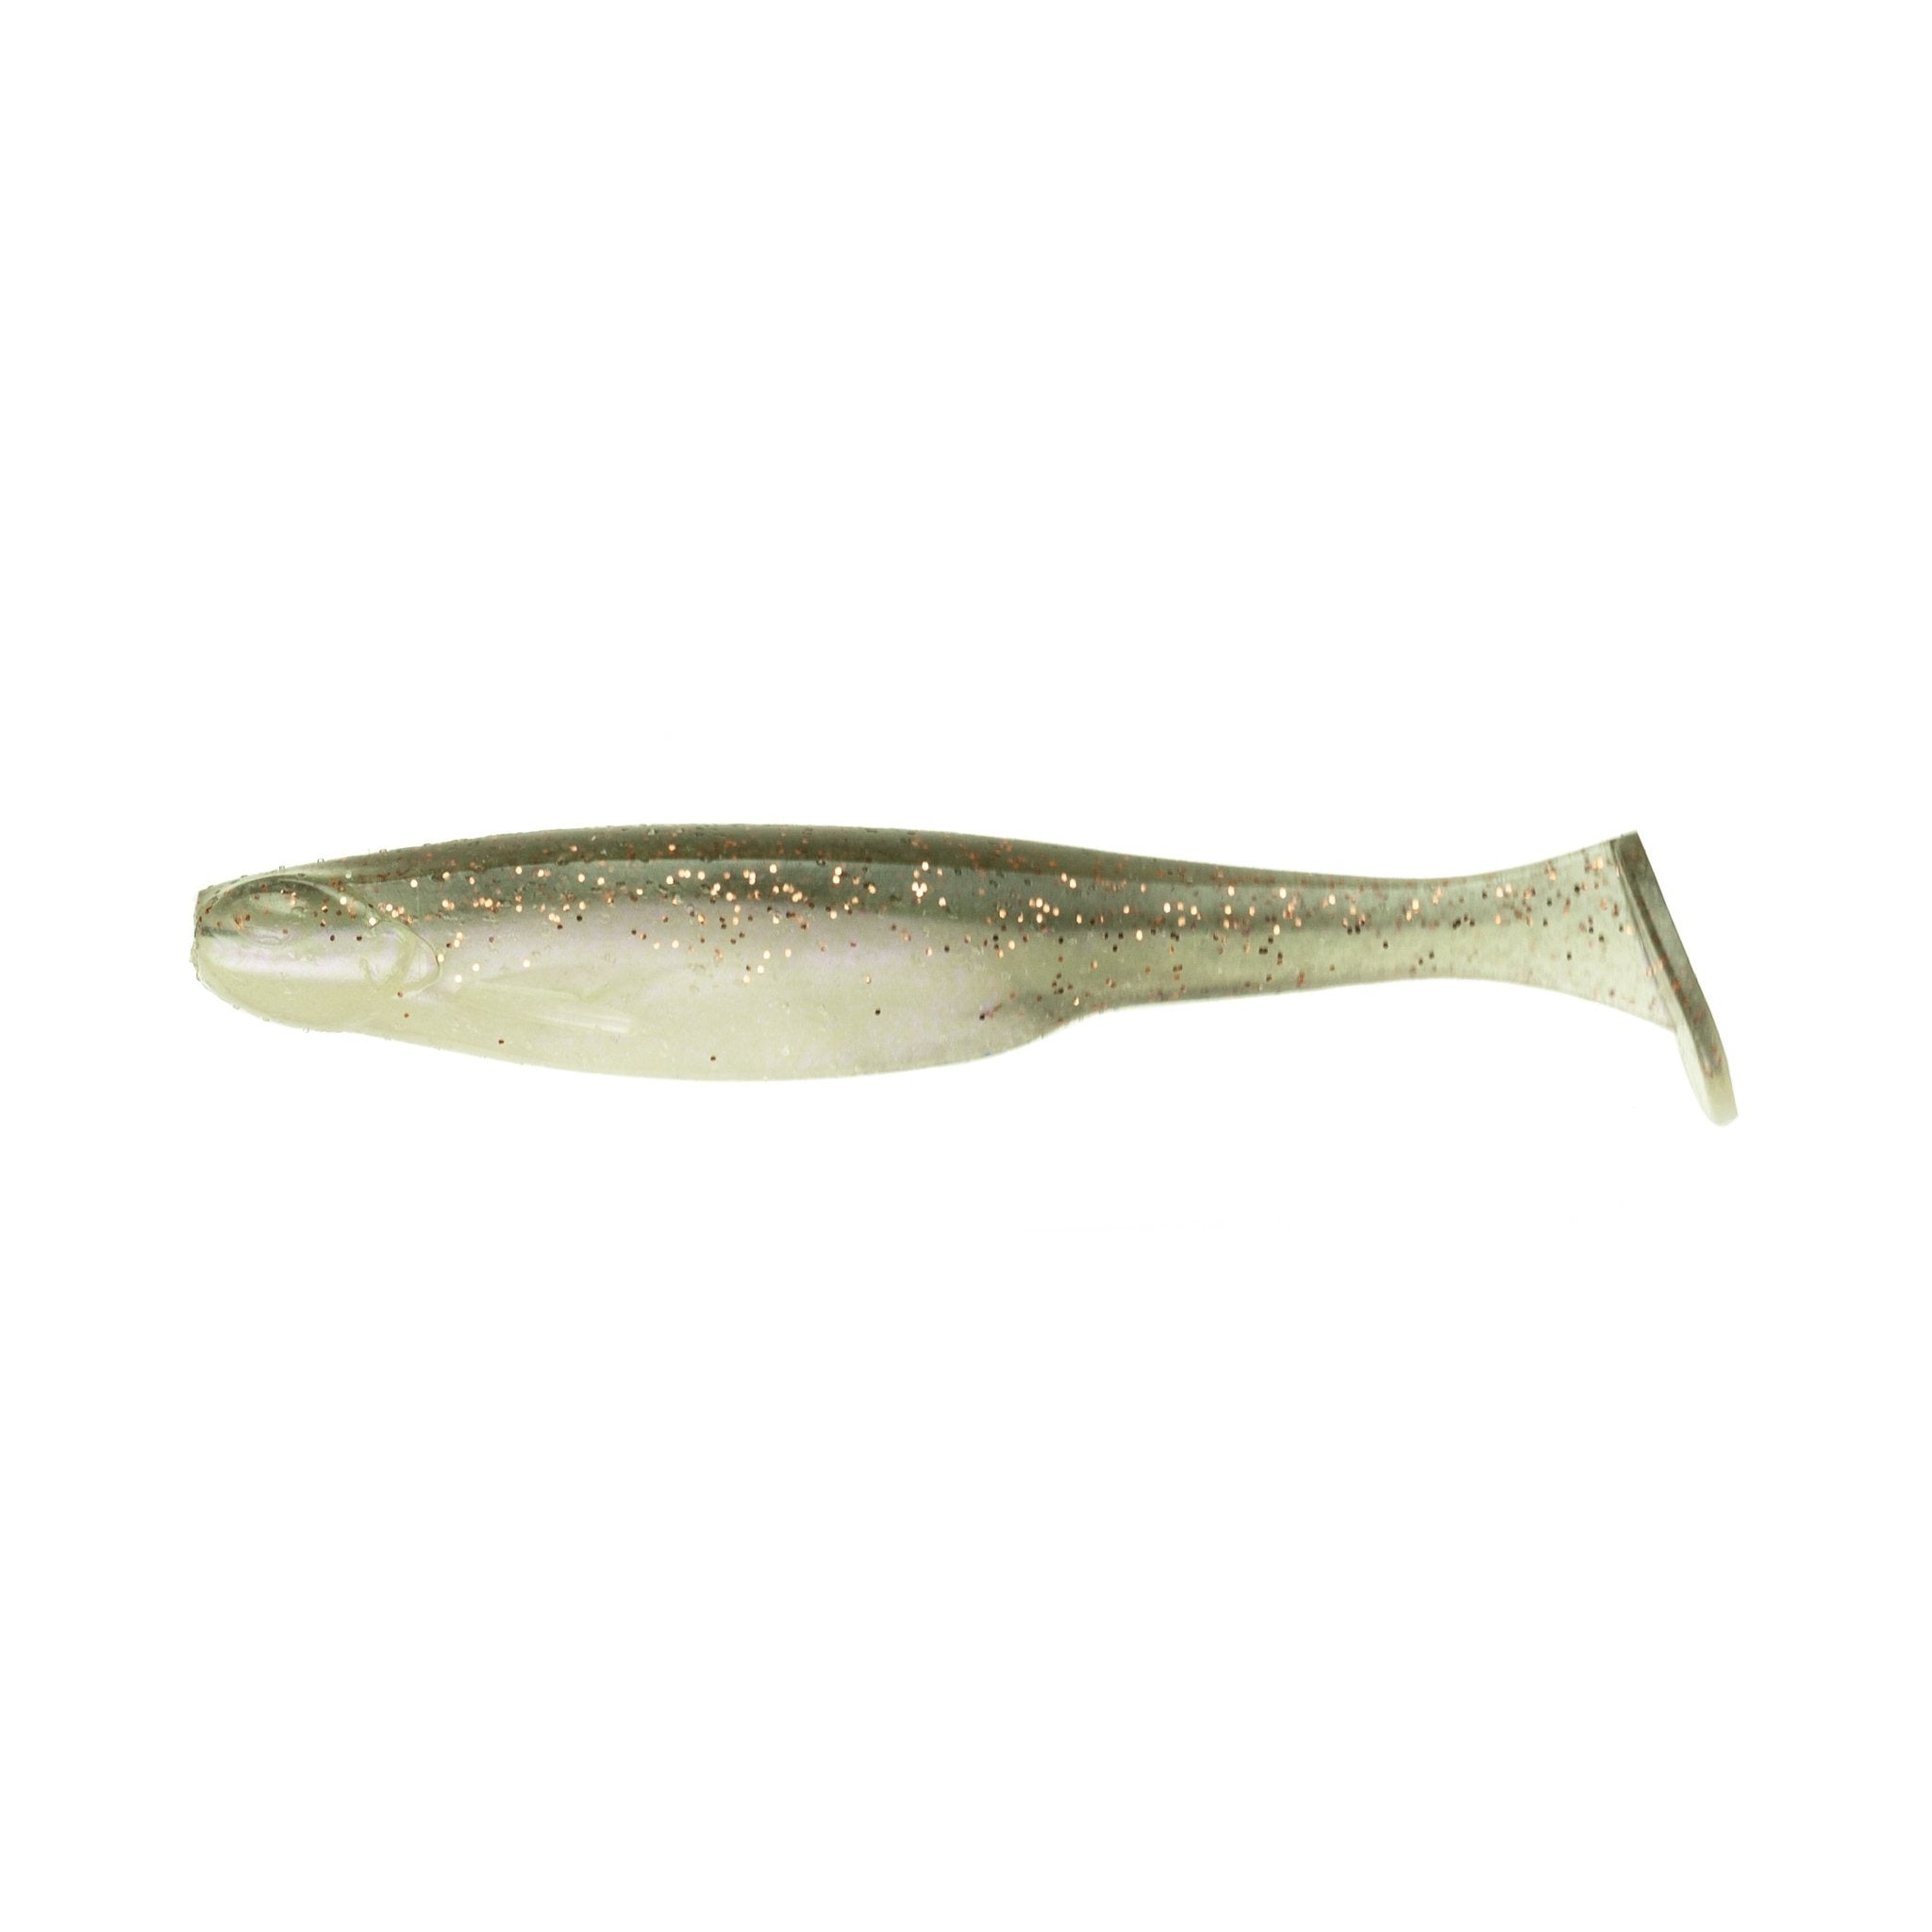 6th Sense Fishing Whale Swimbait 4.5 / Clearwater Rose